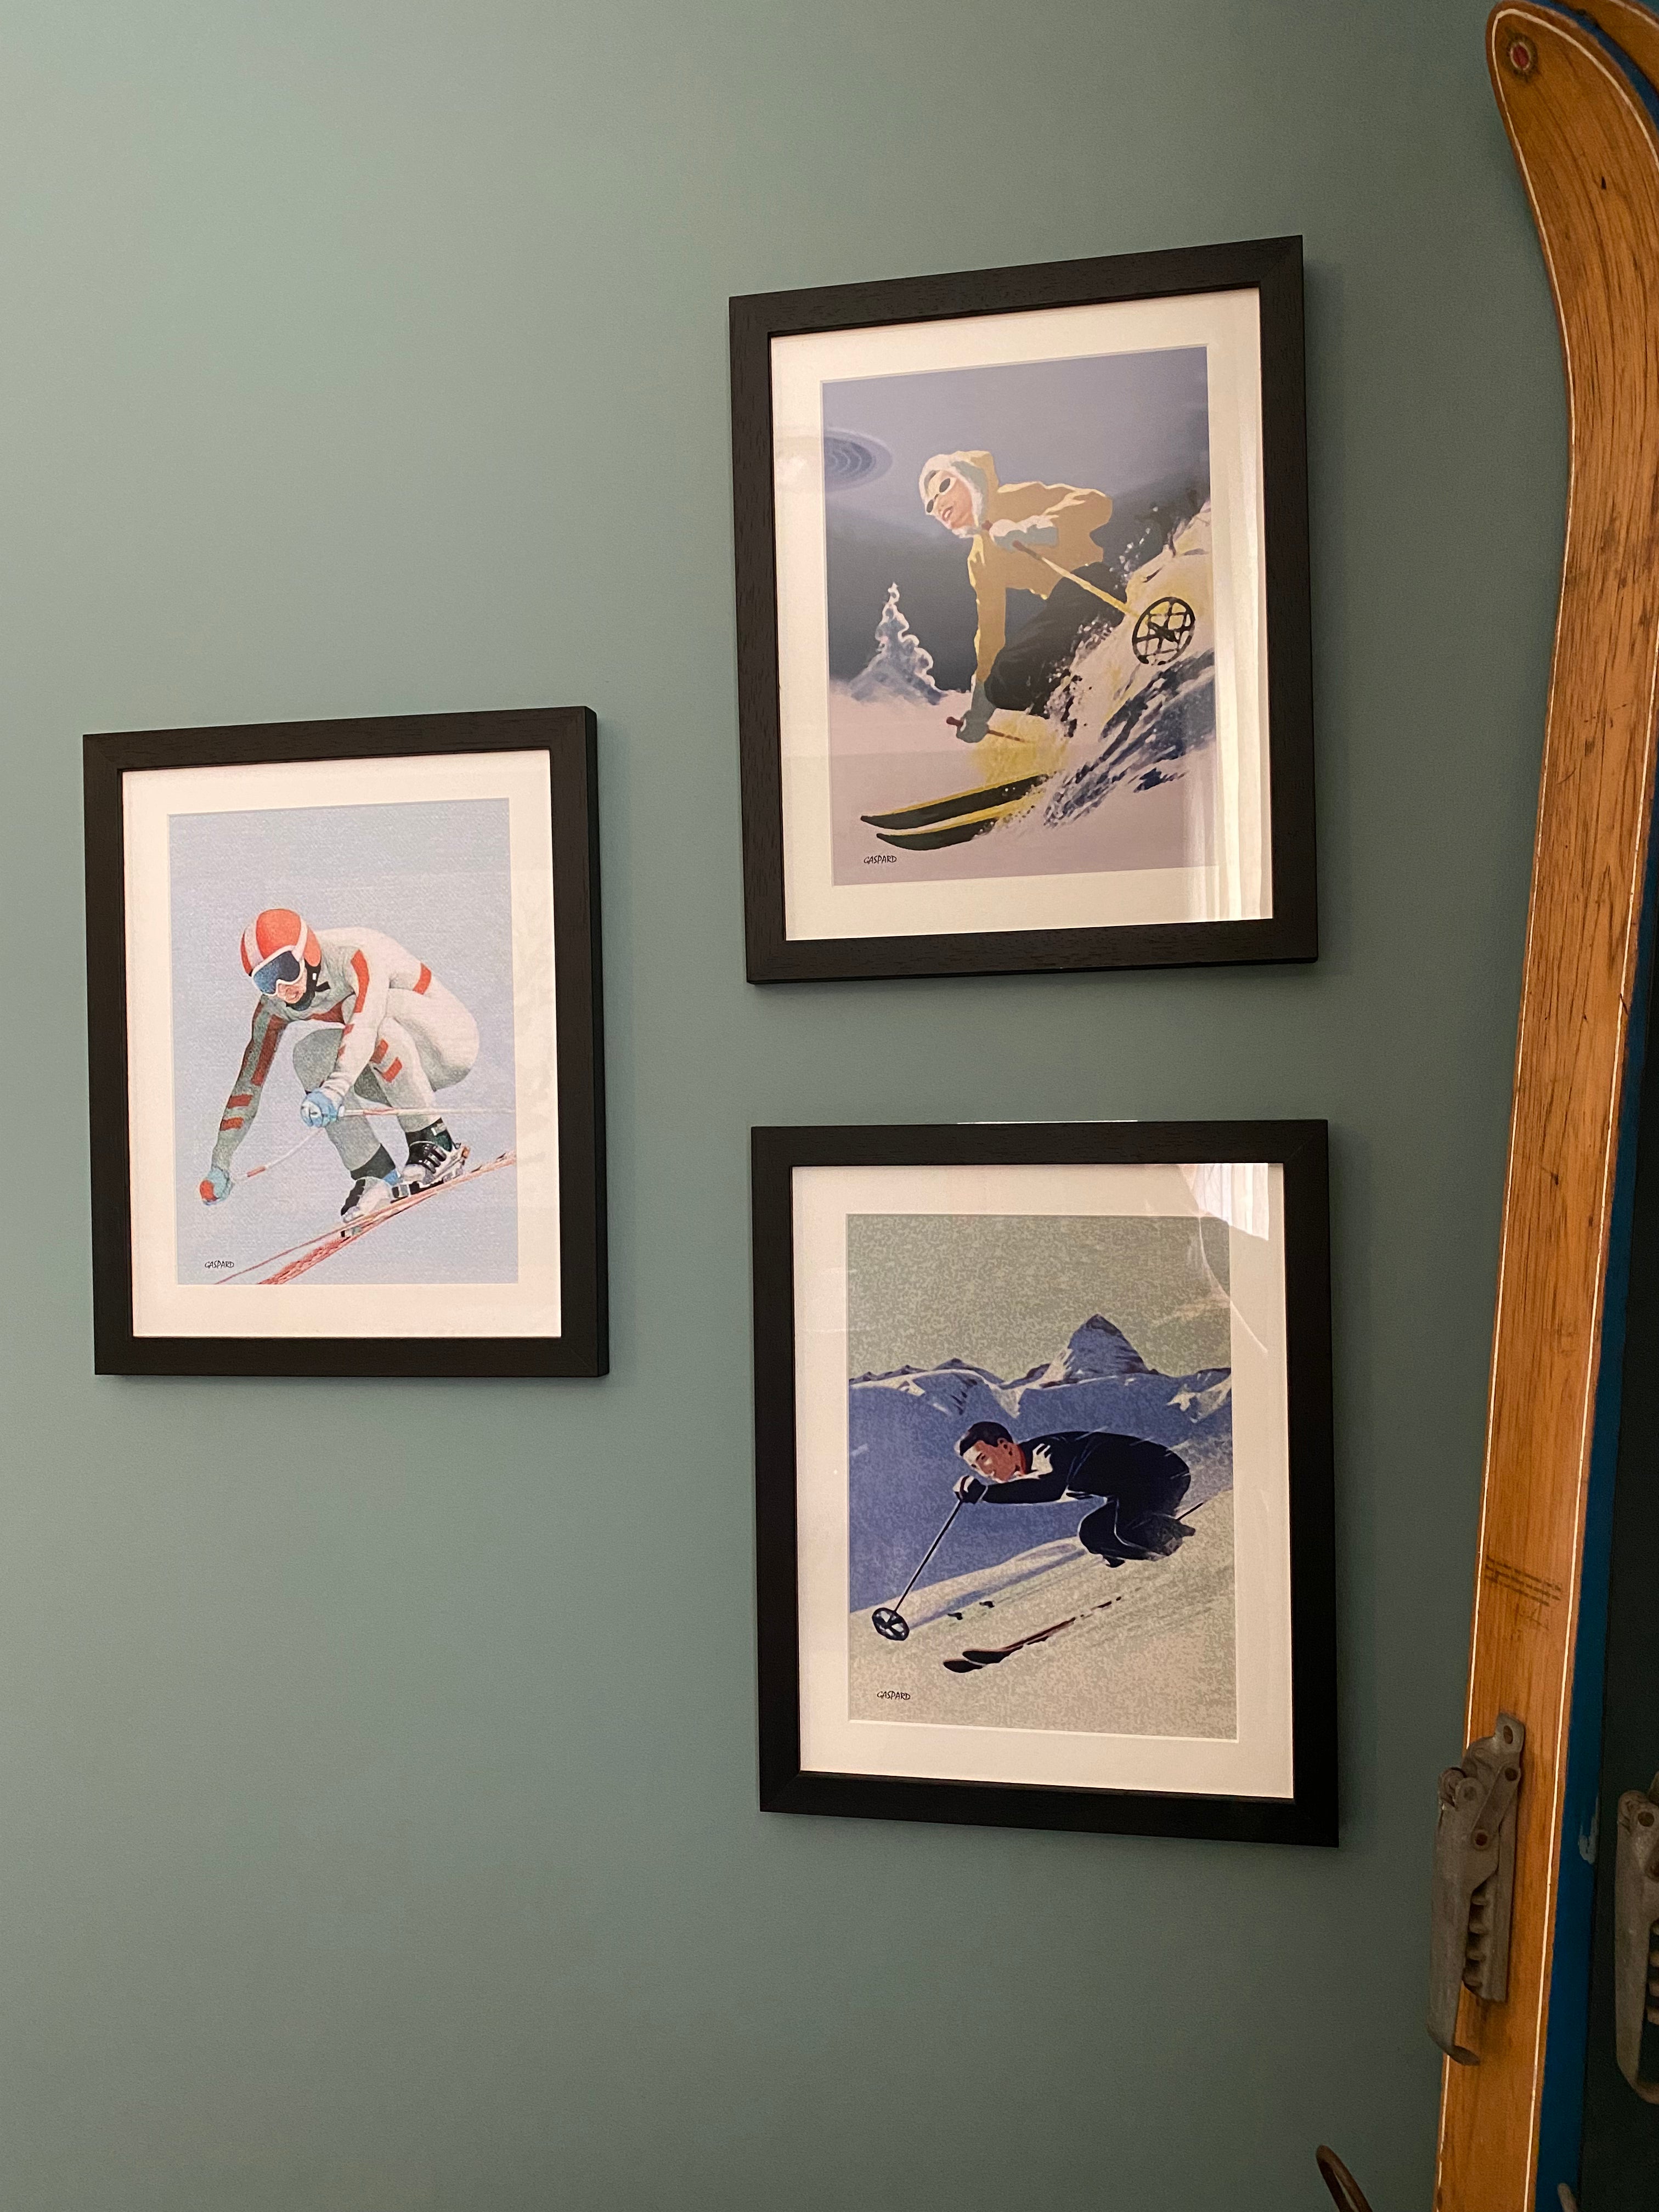 3 vintage black framed photos hanging on a green wall. 1st is Black framed vintage photo of a woman in a yellow jacket with a white fur at the edge of the hood and blue pants skiing downhill, leaning to the right into the hill with a tree and the shadow of the mountains in the background below a blue sky. Second is a man in blue suit skiing aggressively downhill, with mountains behind him. Third is a crouching ski racer, light blue sky behind. Vintage wooden skis leaning against the wall on the right